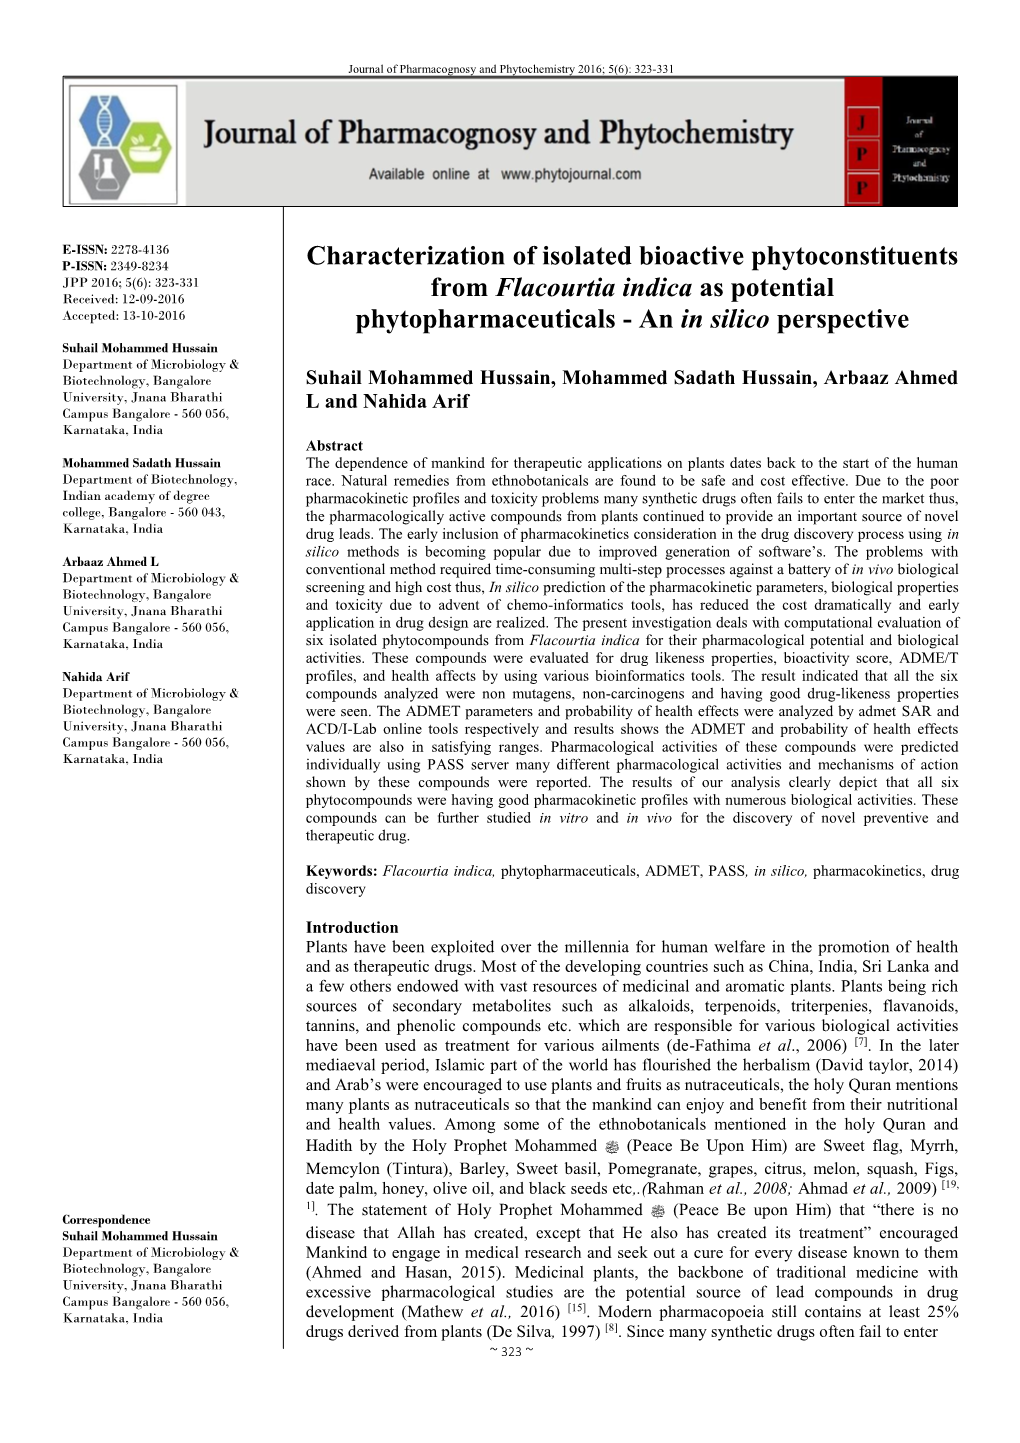 Characterization of Isolated Bioactive Phytoconstituents from Flacourtia